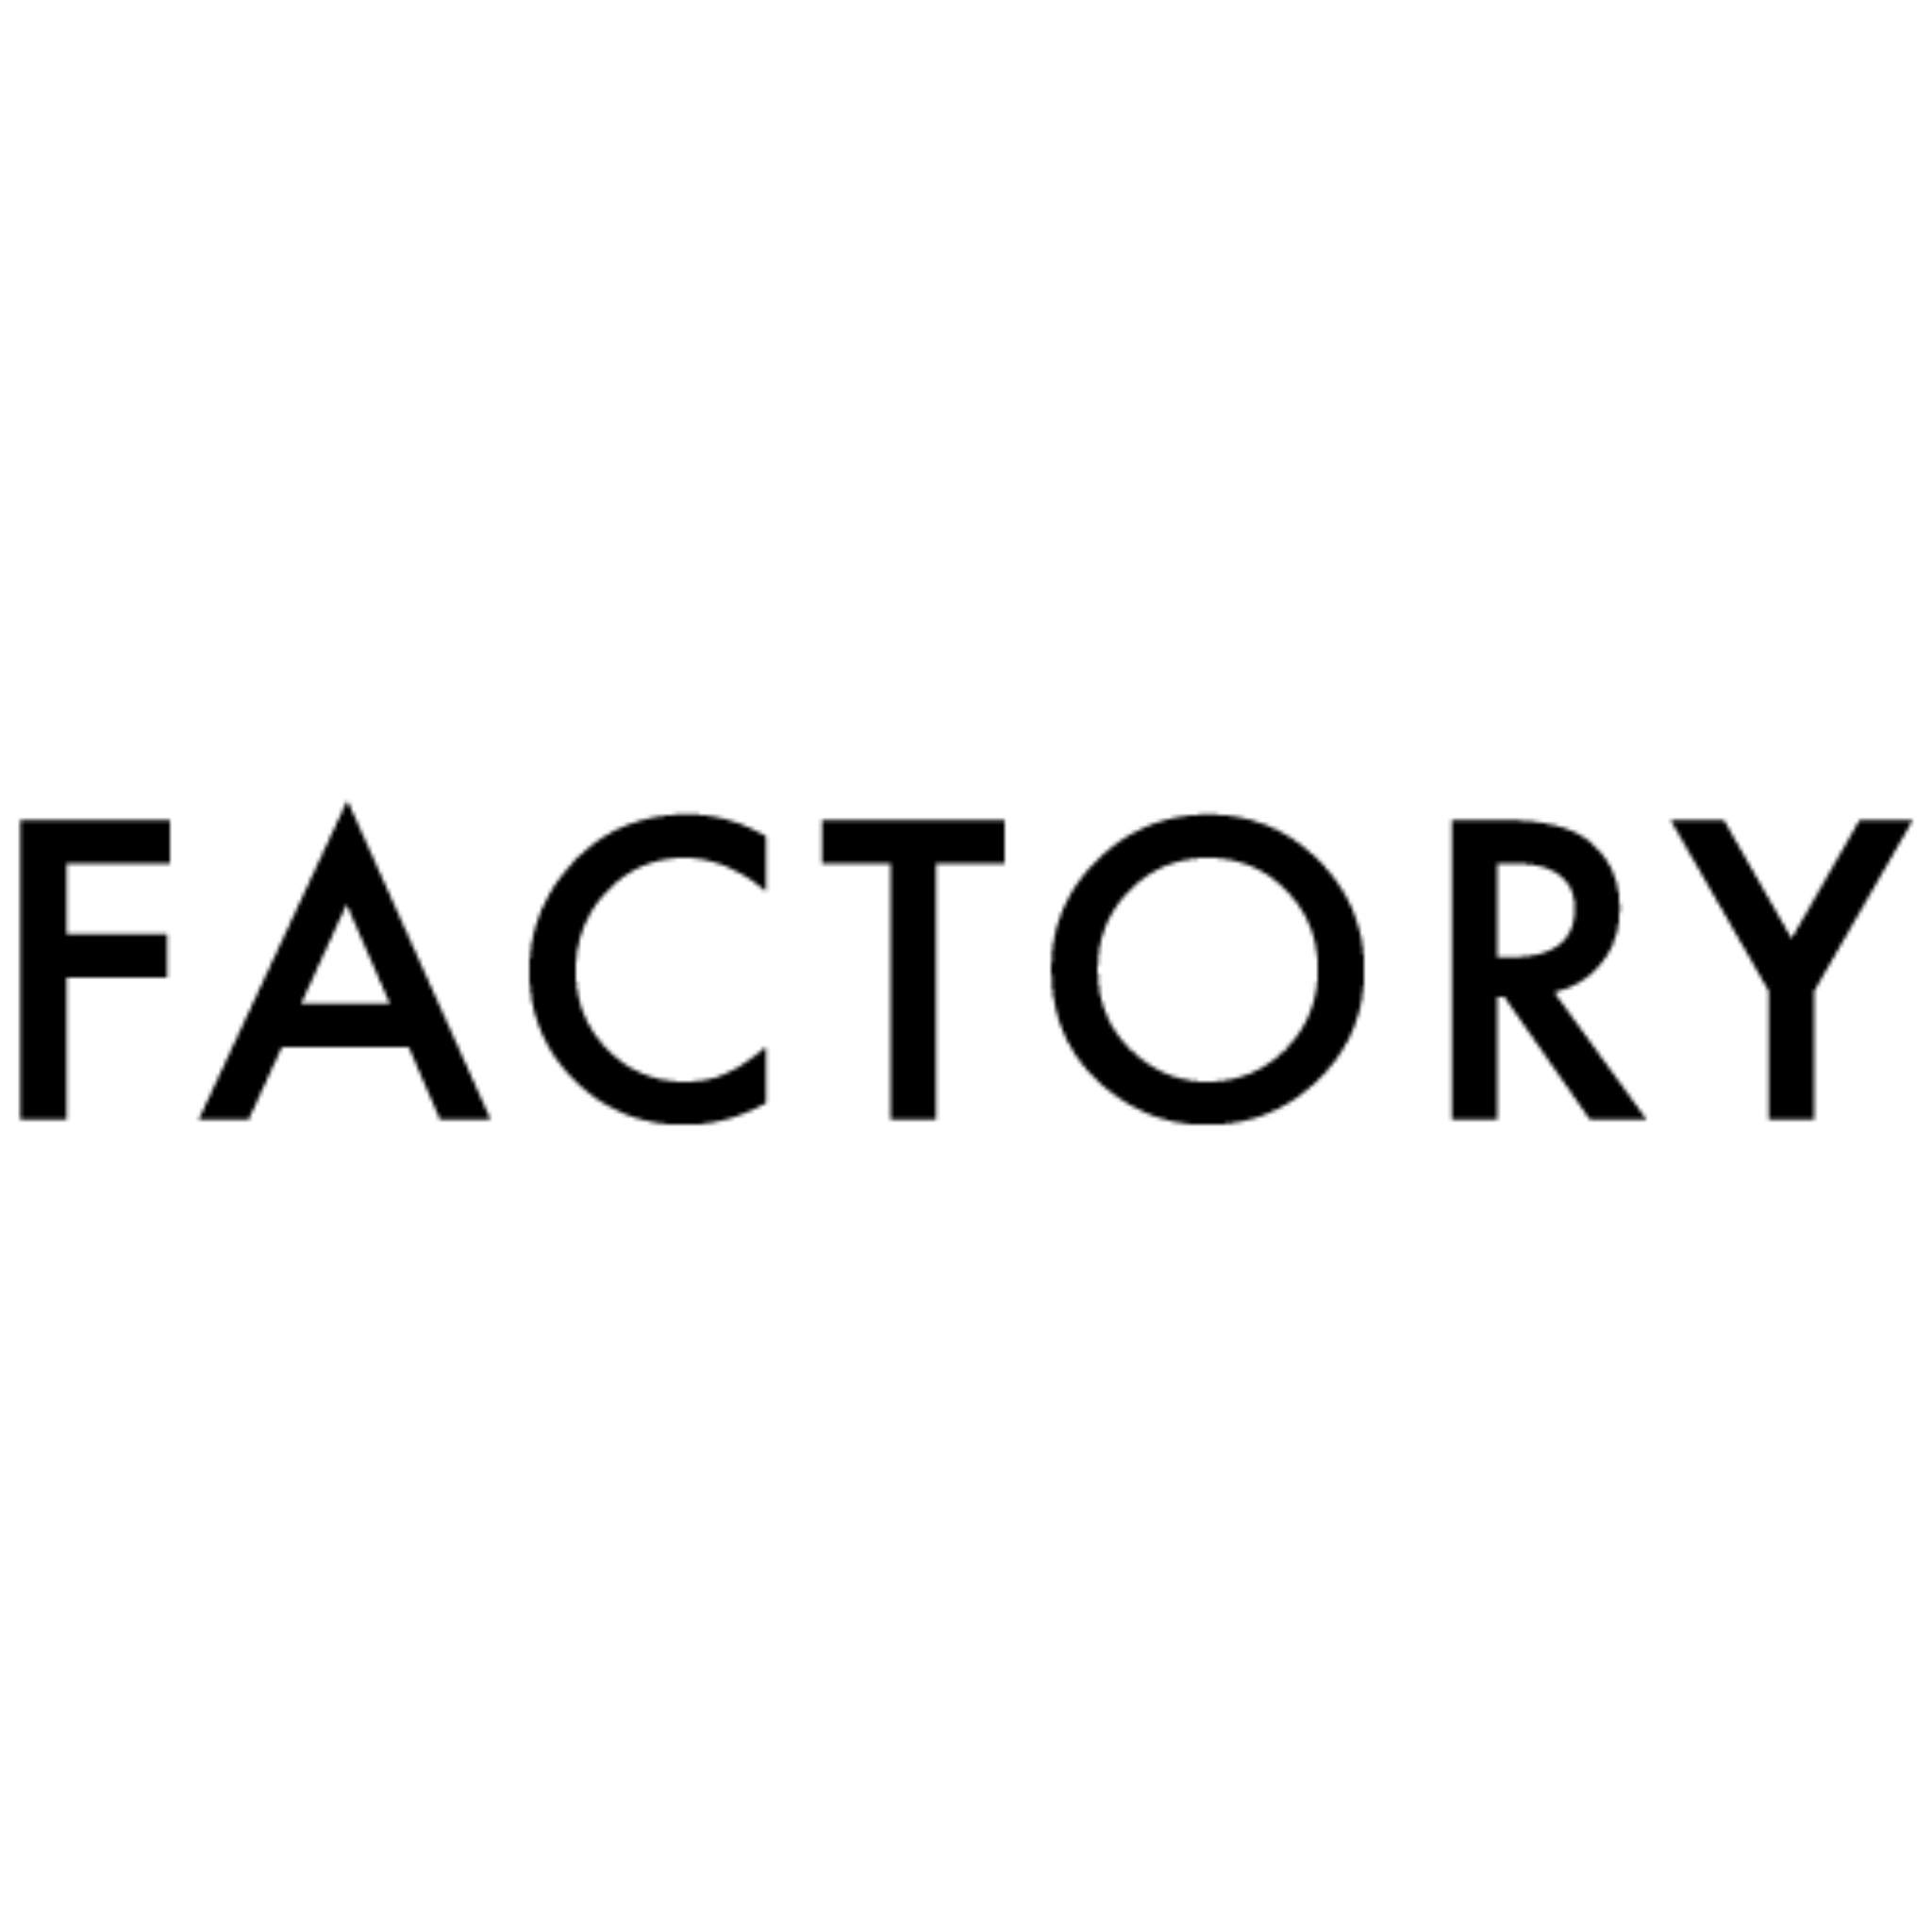 We are proud to present our renewing member - Factory World Wide